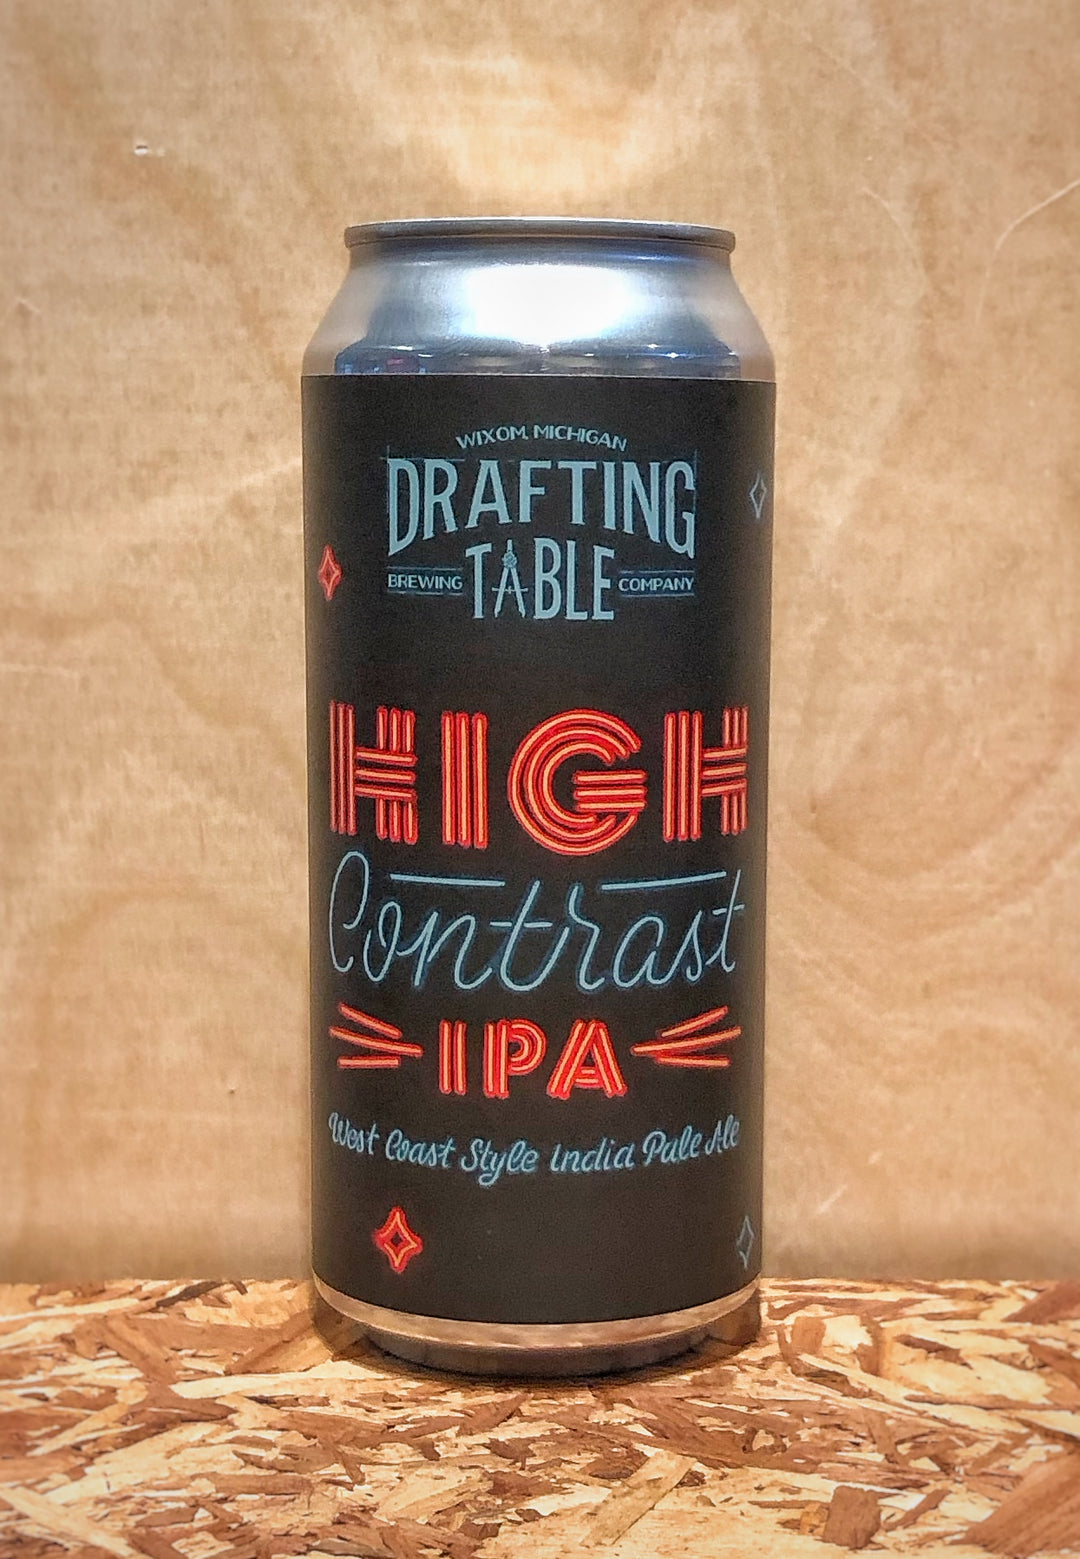 Drafting Table 'High Contrast' West Coast Style IPA (Wixom, MI)